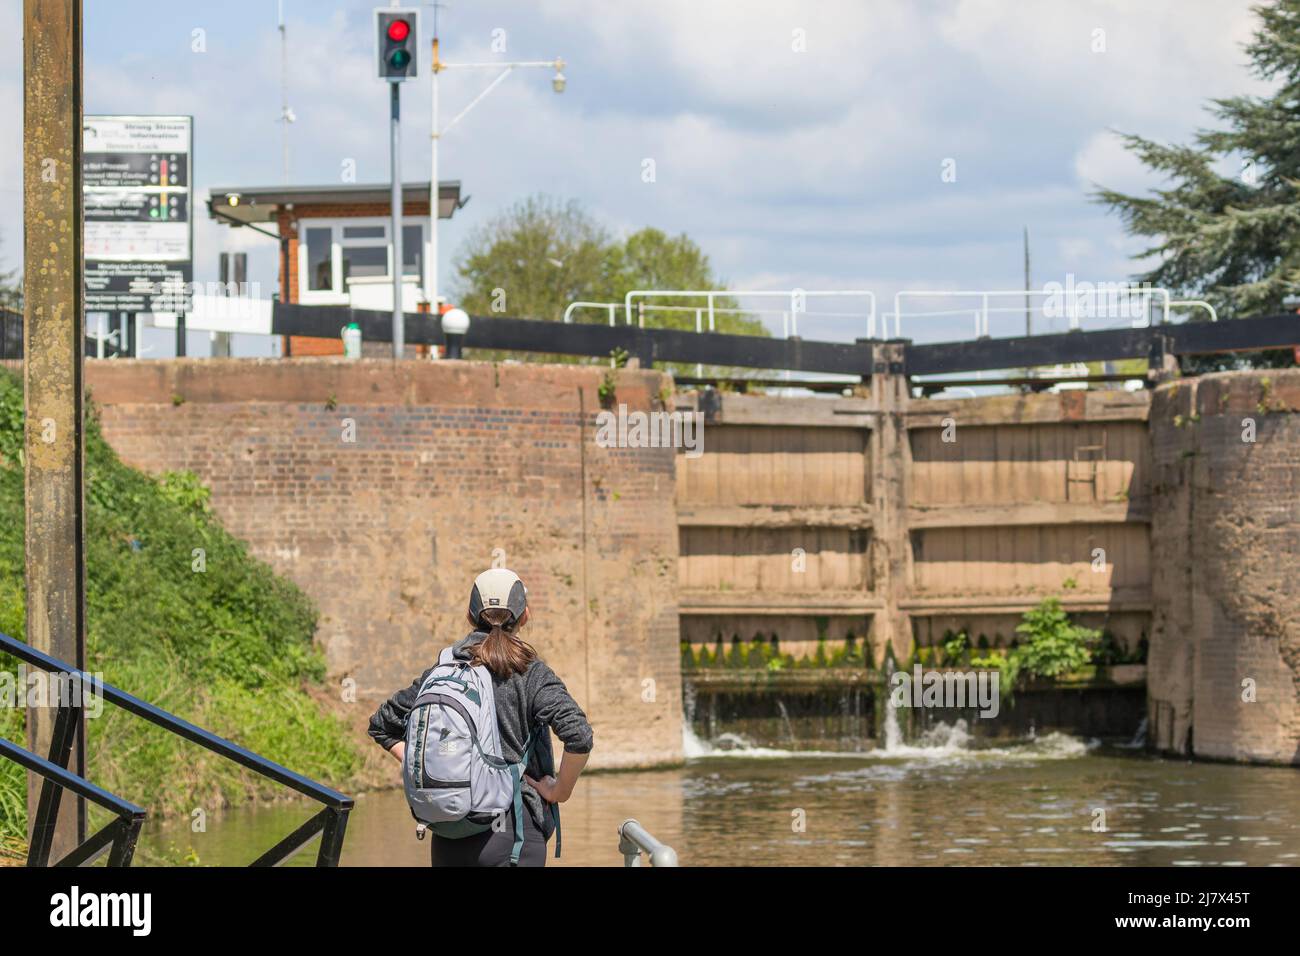 Rear view of a woman hiker looking at a set of closed automated river lock gates, Bevere Lock, Worcestershire, UK (focus on woman). Stock Photo